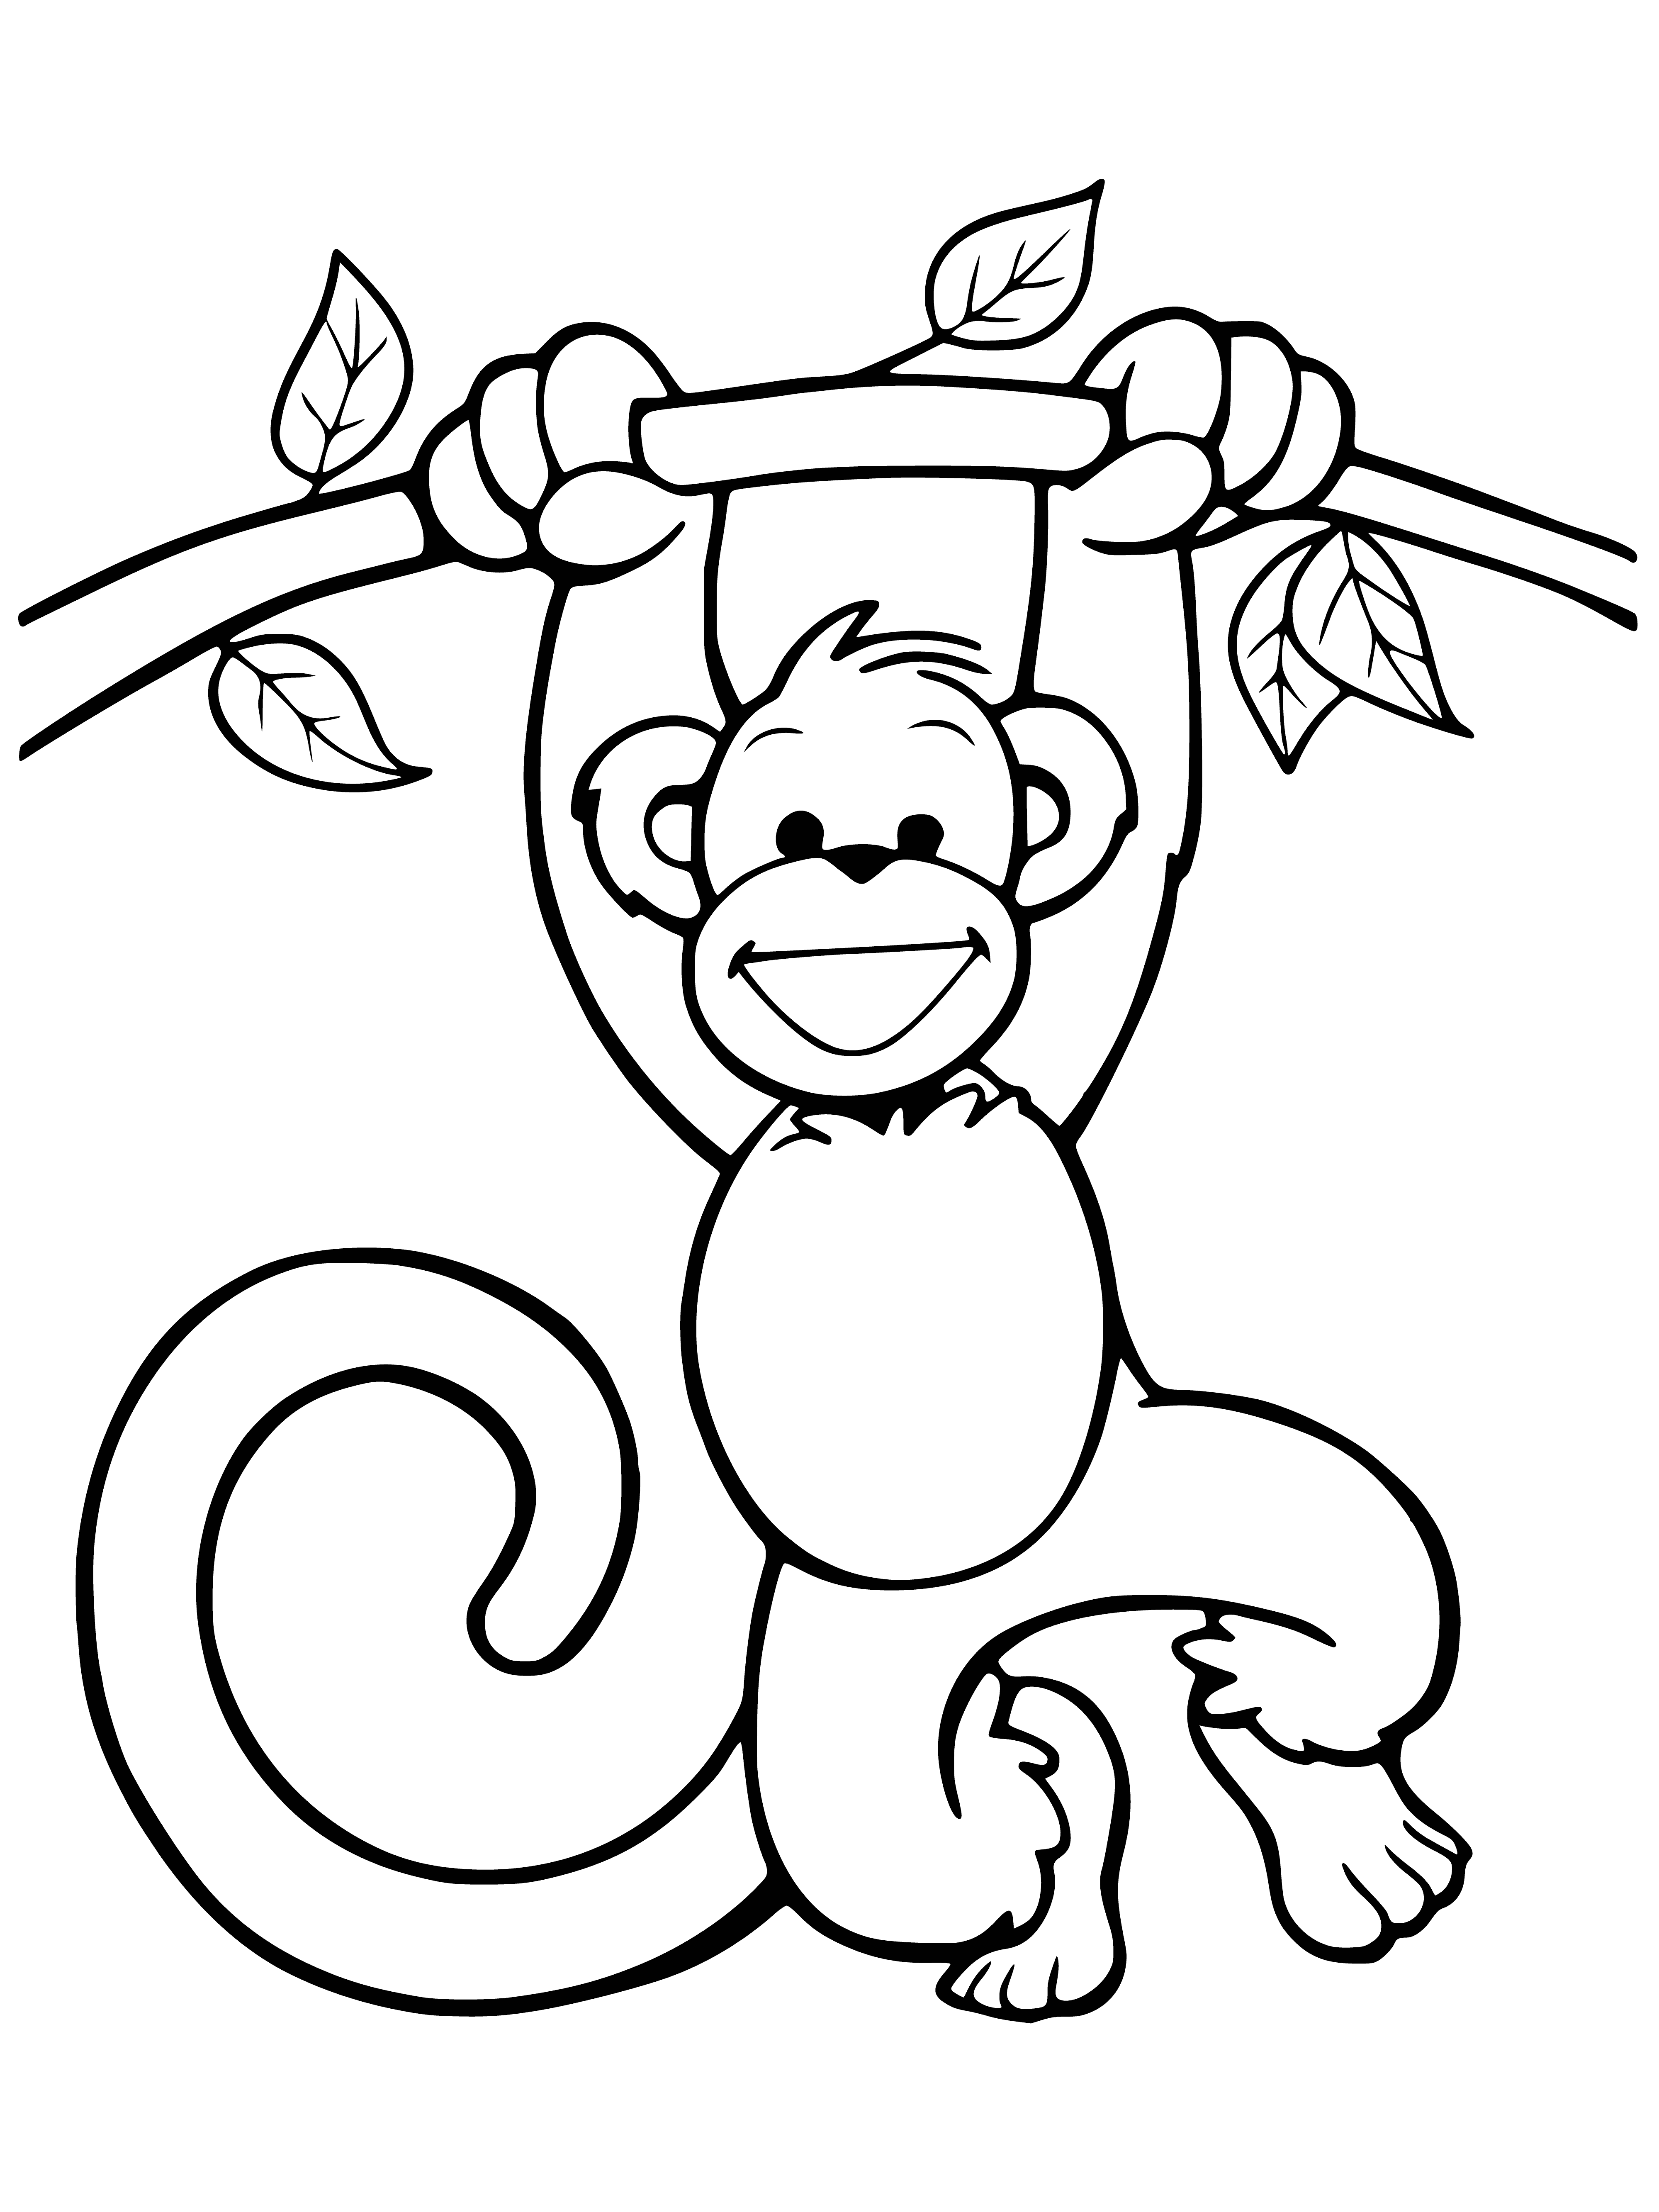 Funny monkey coloring page